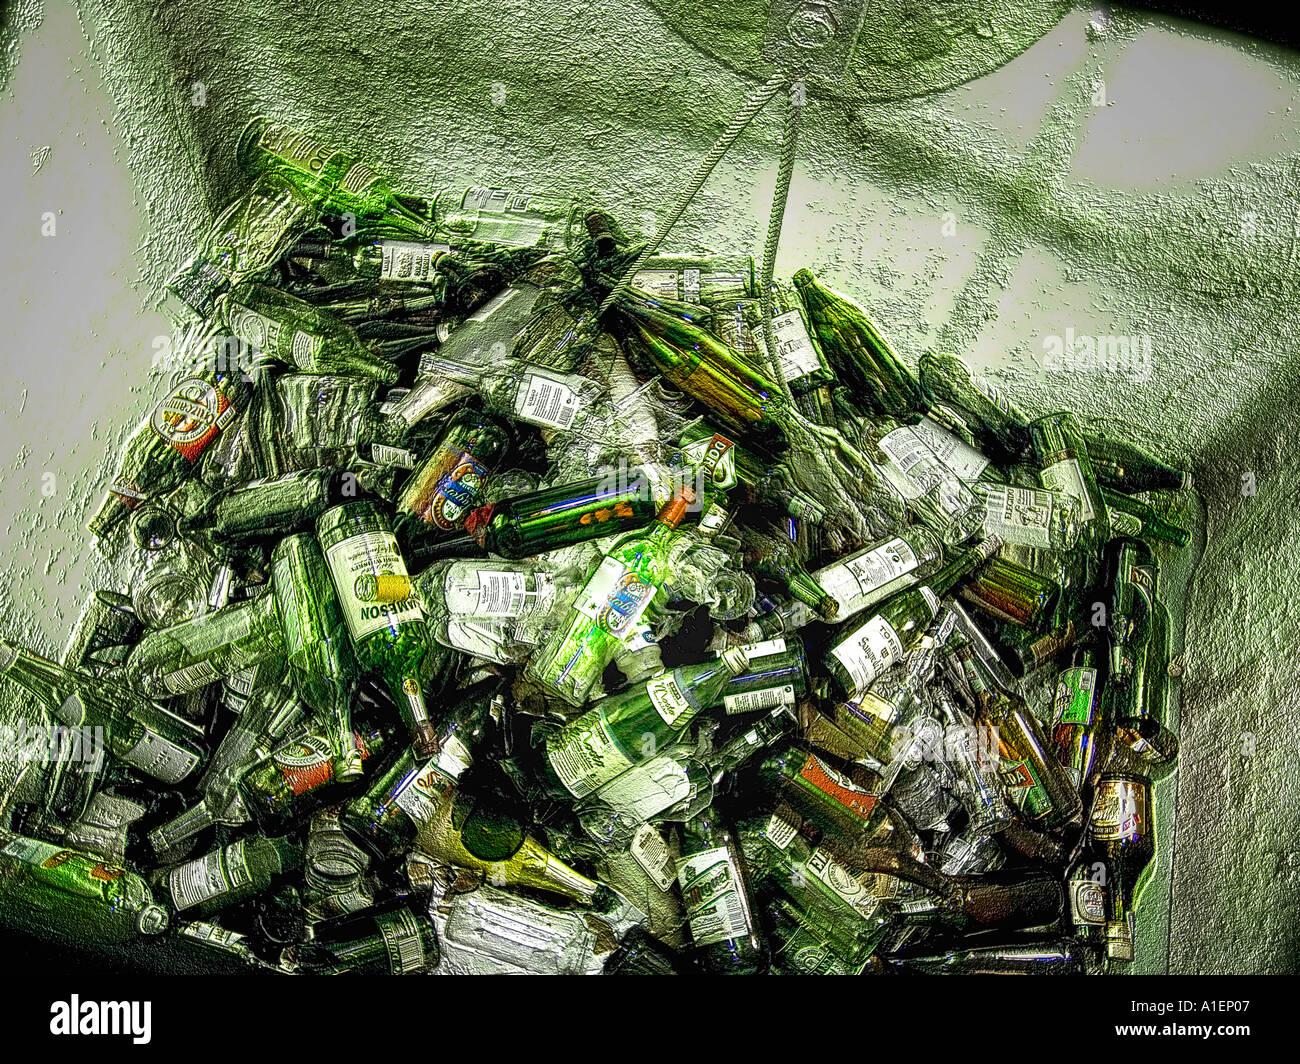 Variety of glass bottles in road side recycling container Stock Photo